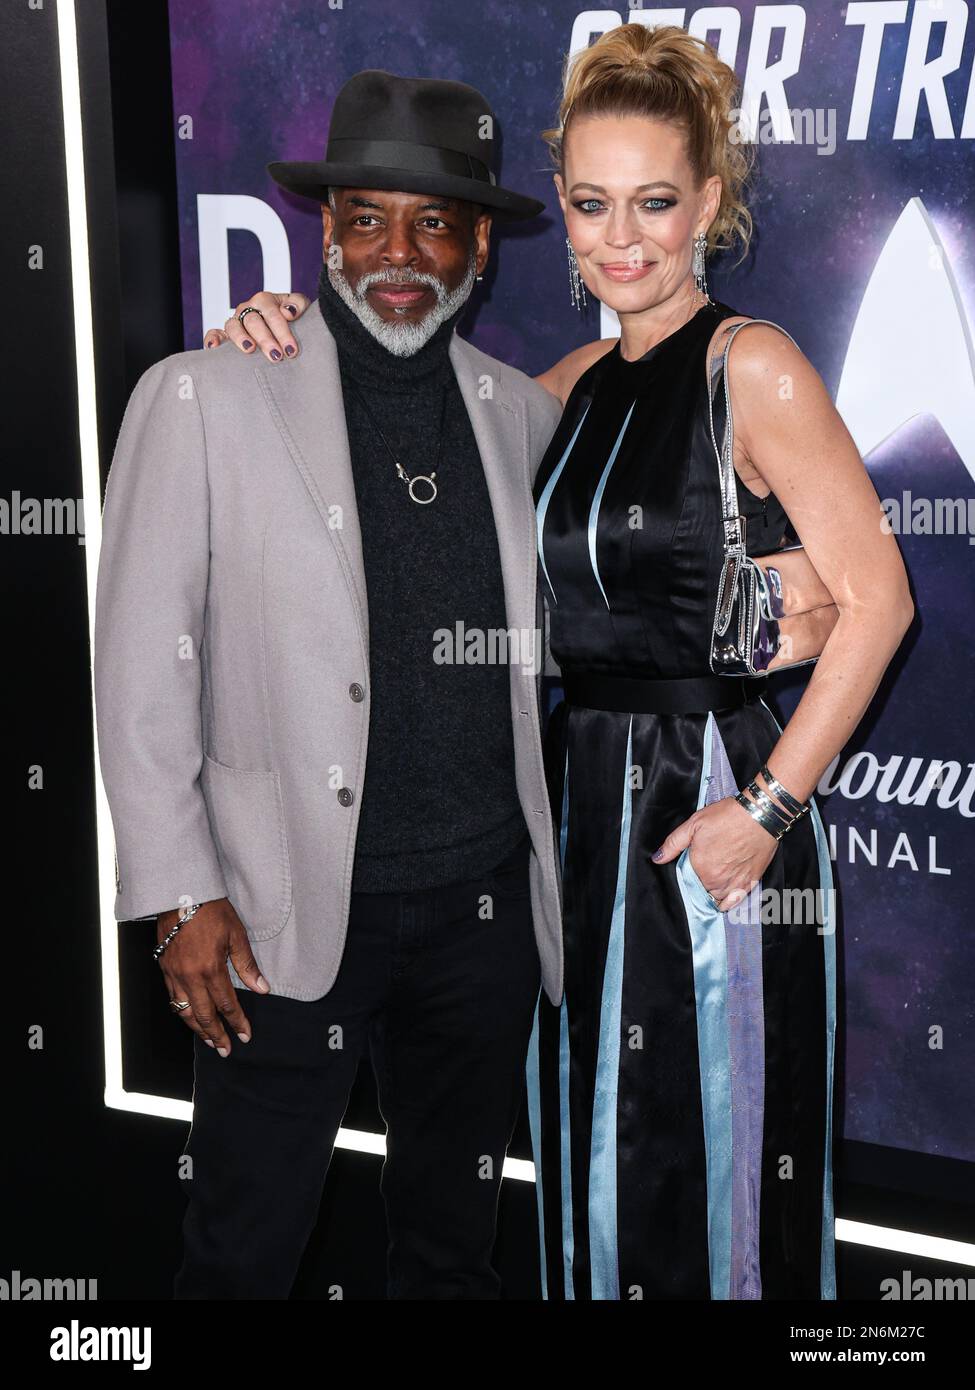 HOLLYWOOD, LOS ANGELES, CALIFORNIA, USA - FEBRUARY 09: LeVar Burton and Jeri Ryan arrive at the Los Angeles Premiere Of Paramount+'s Original Series 'Star Trek: Picard' Third And Final Season held at the TCL Chinese Theatre IMAX on February 9, 2023 in Hollywood, Los Angeles, California, United States. (Photo by Xavier Collin/Image Press Agency) Stock Photo